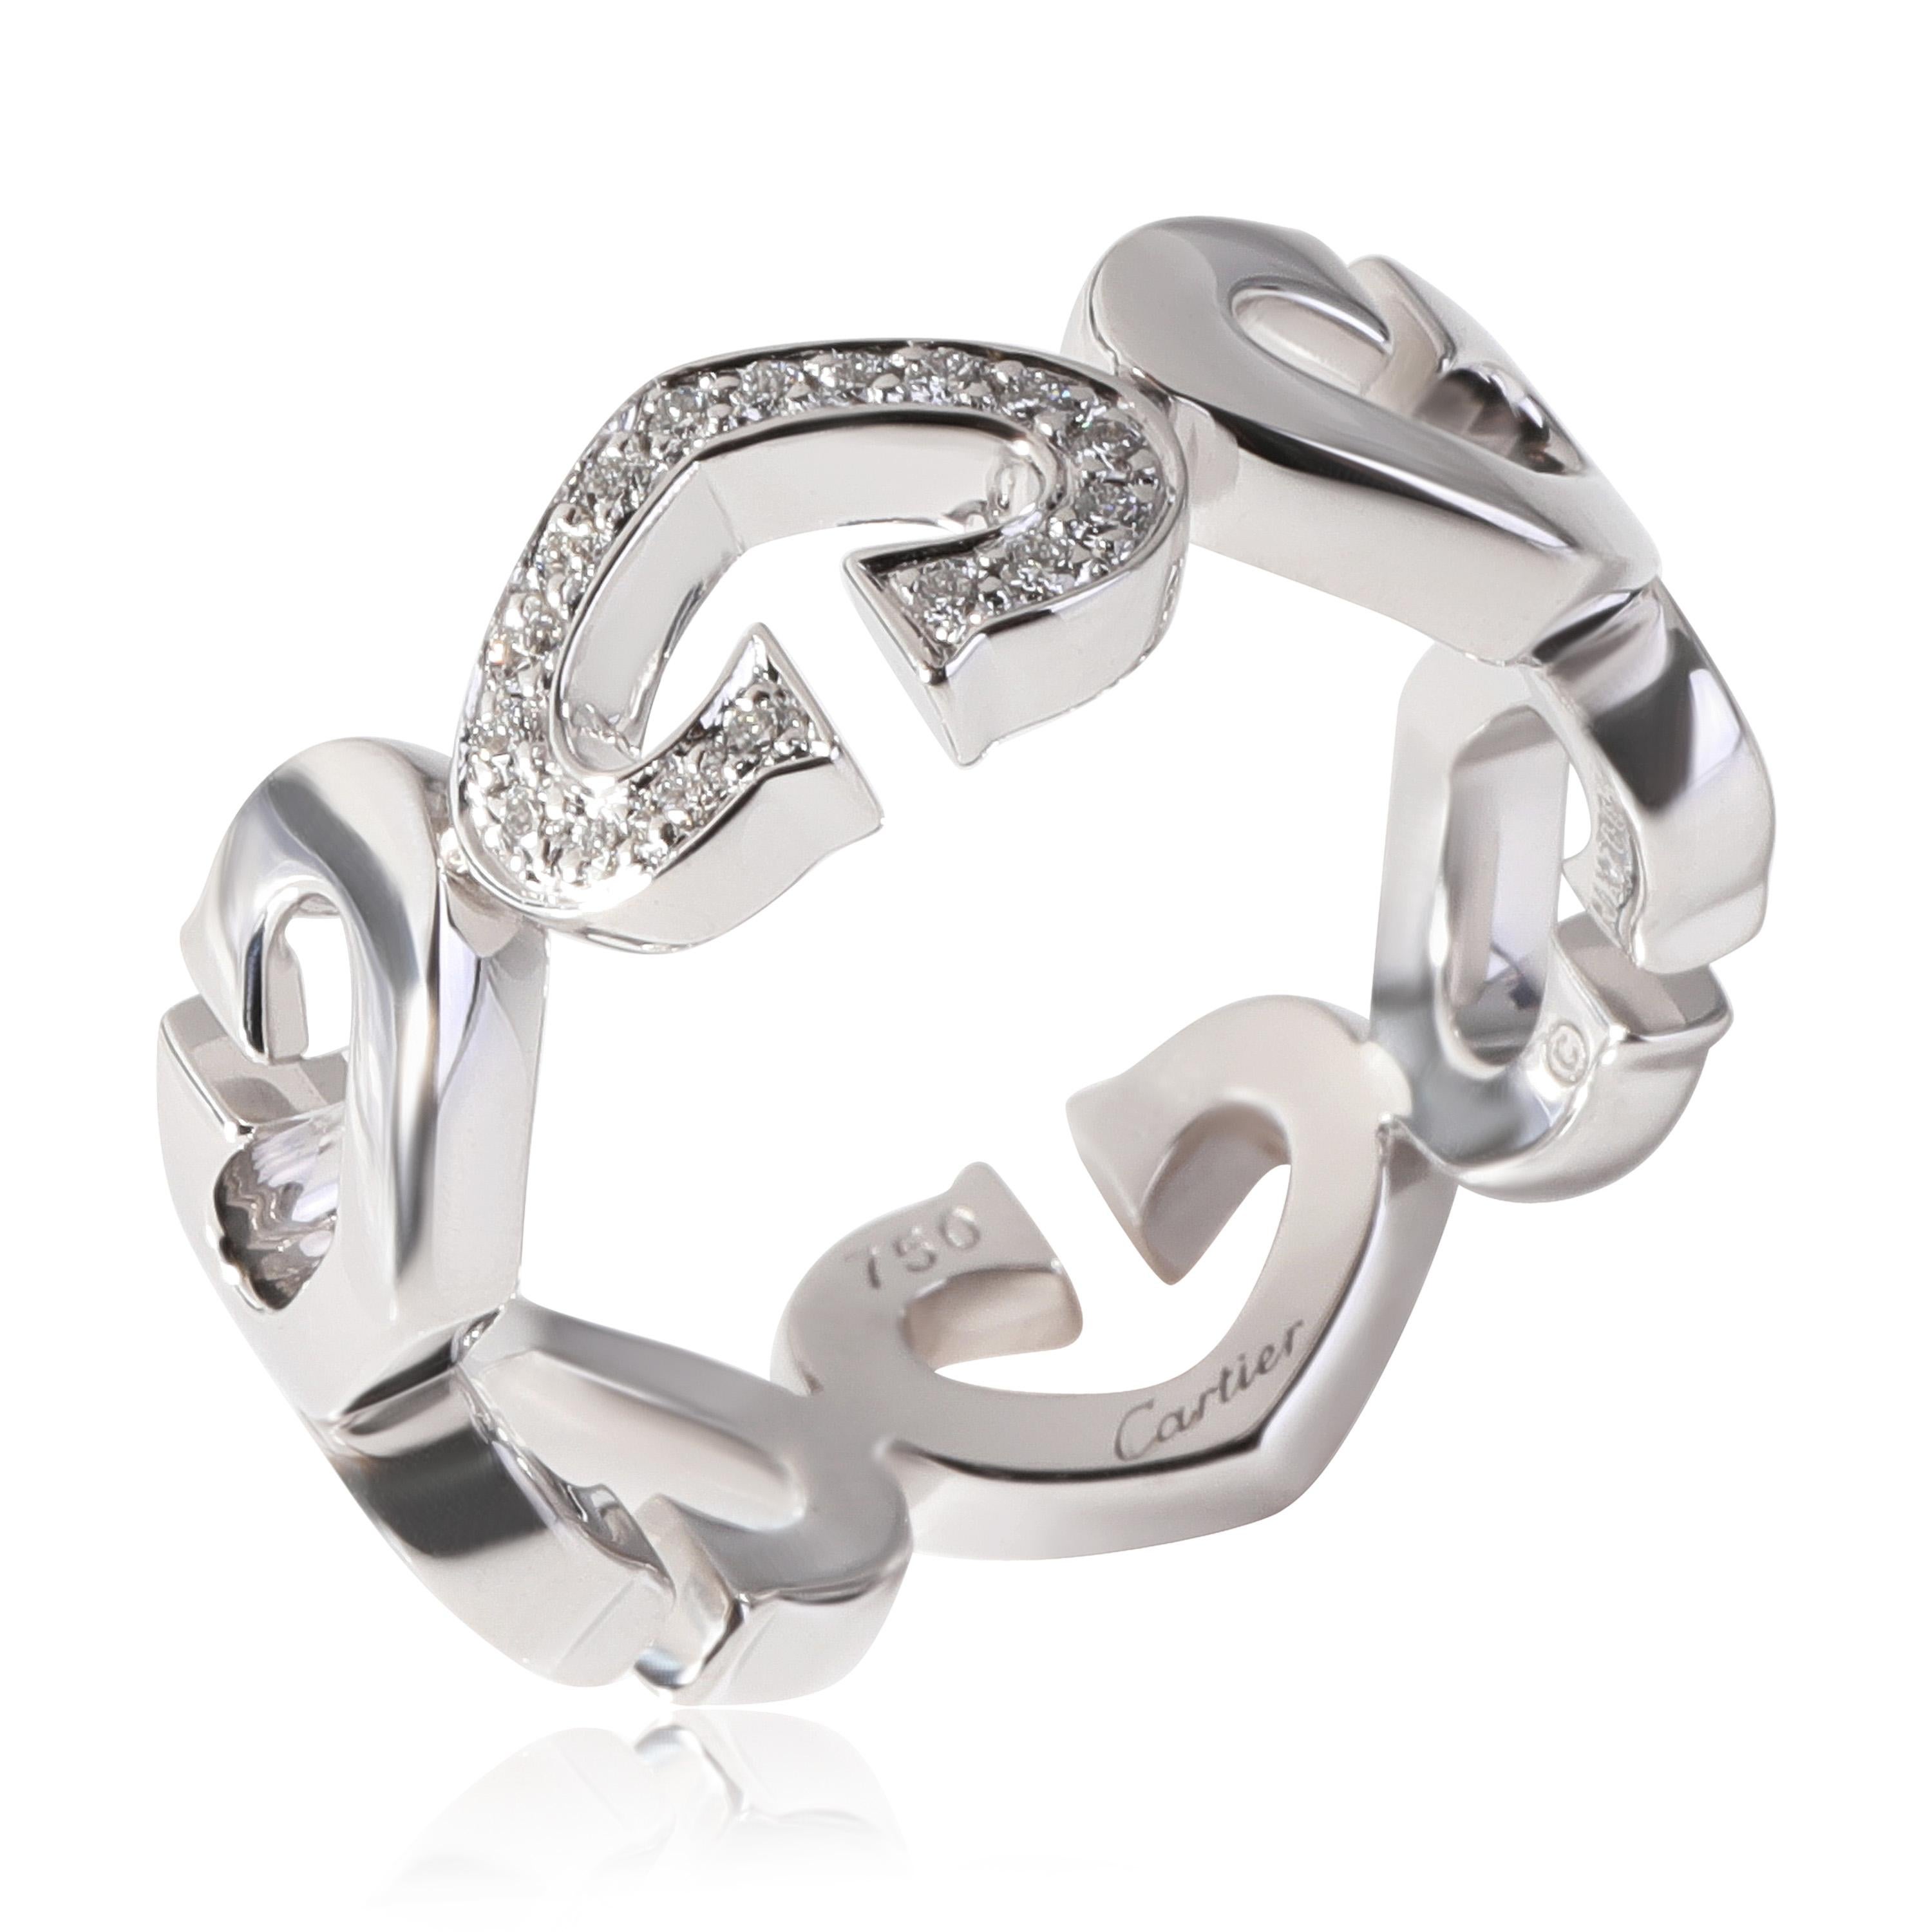 Cartier C Heart De Cartier Diamond Ring in 18k White Gold 0.13 CTW

PRIMARY DETAILS
SKU: 119553
Listing Title: Cartier C Heart De Cartier Diamond Ring in 18k White Gold 0.13 CTW
Condition Description: Retails for 4550 USD. In excellent condition and